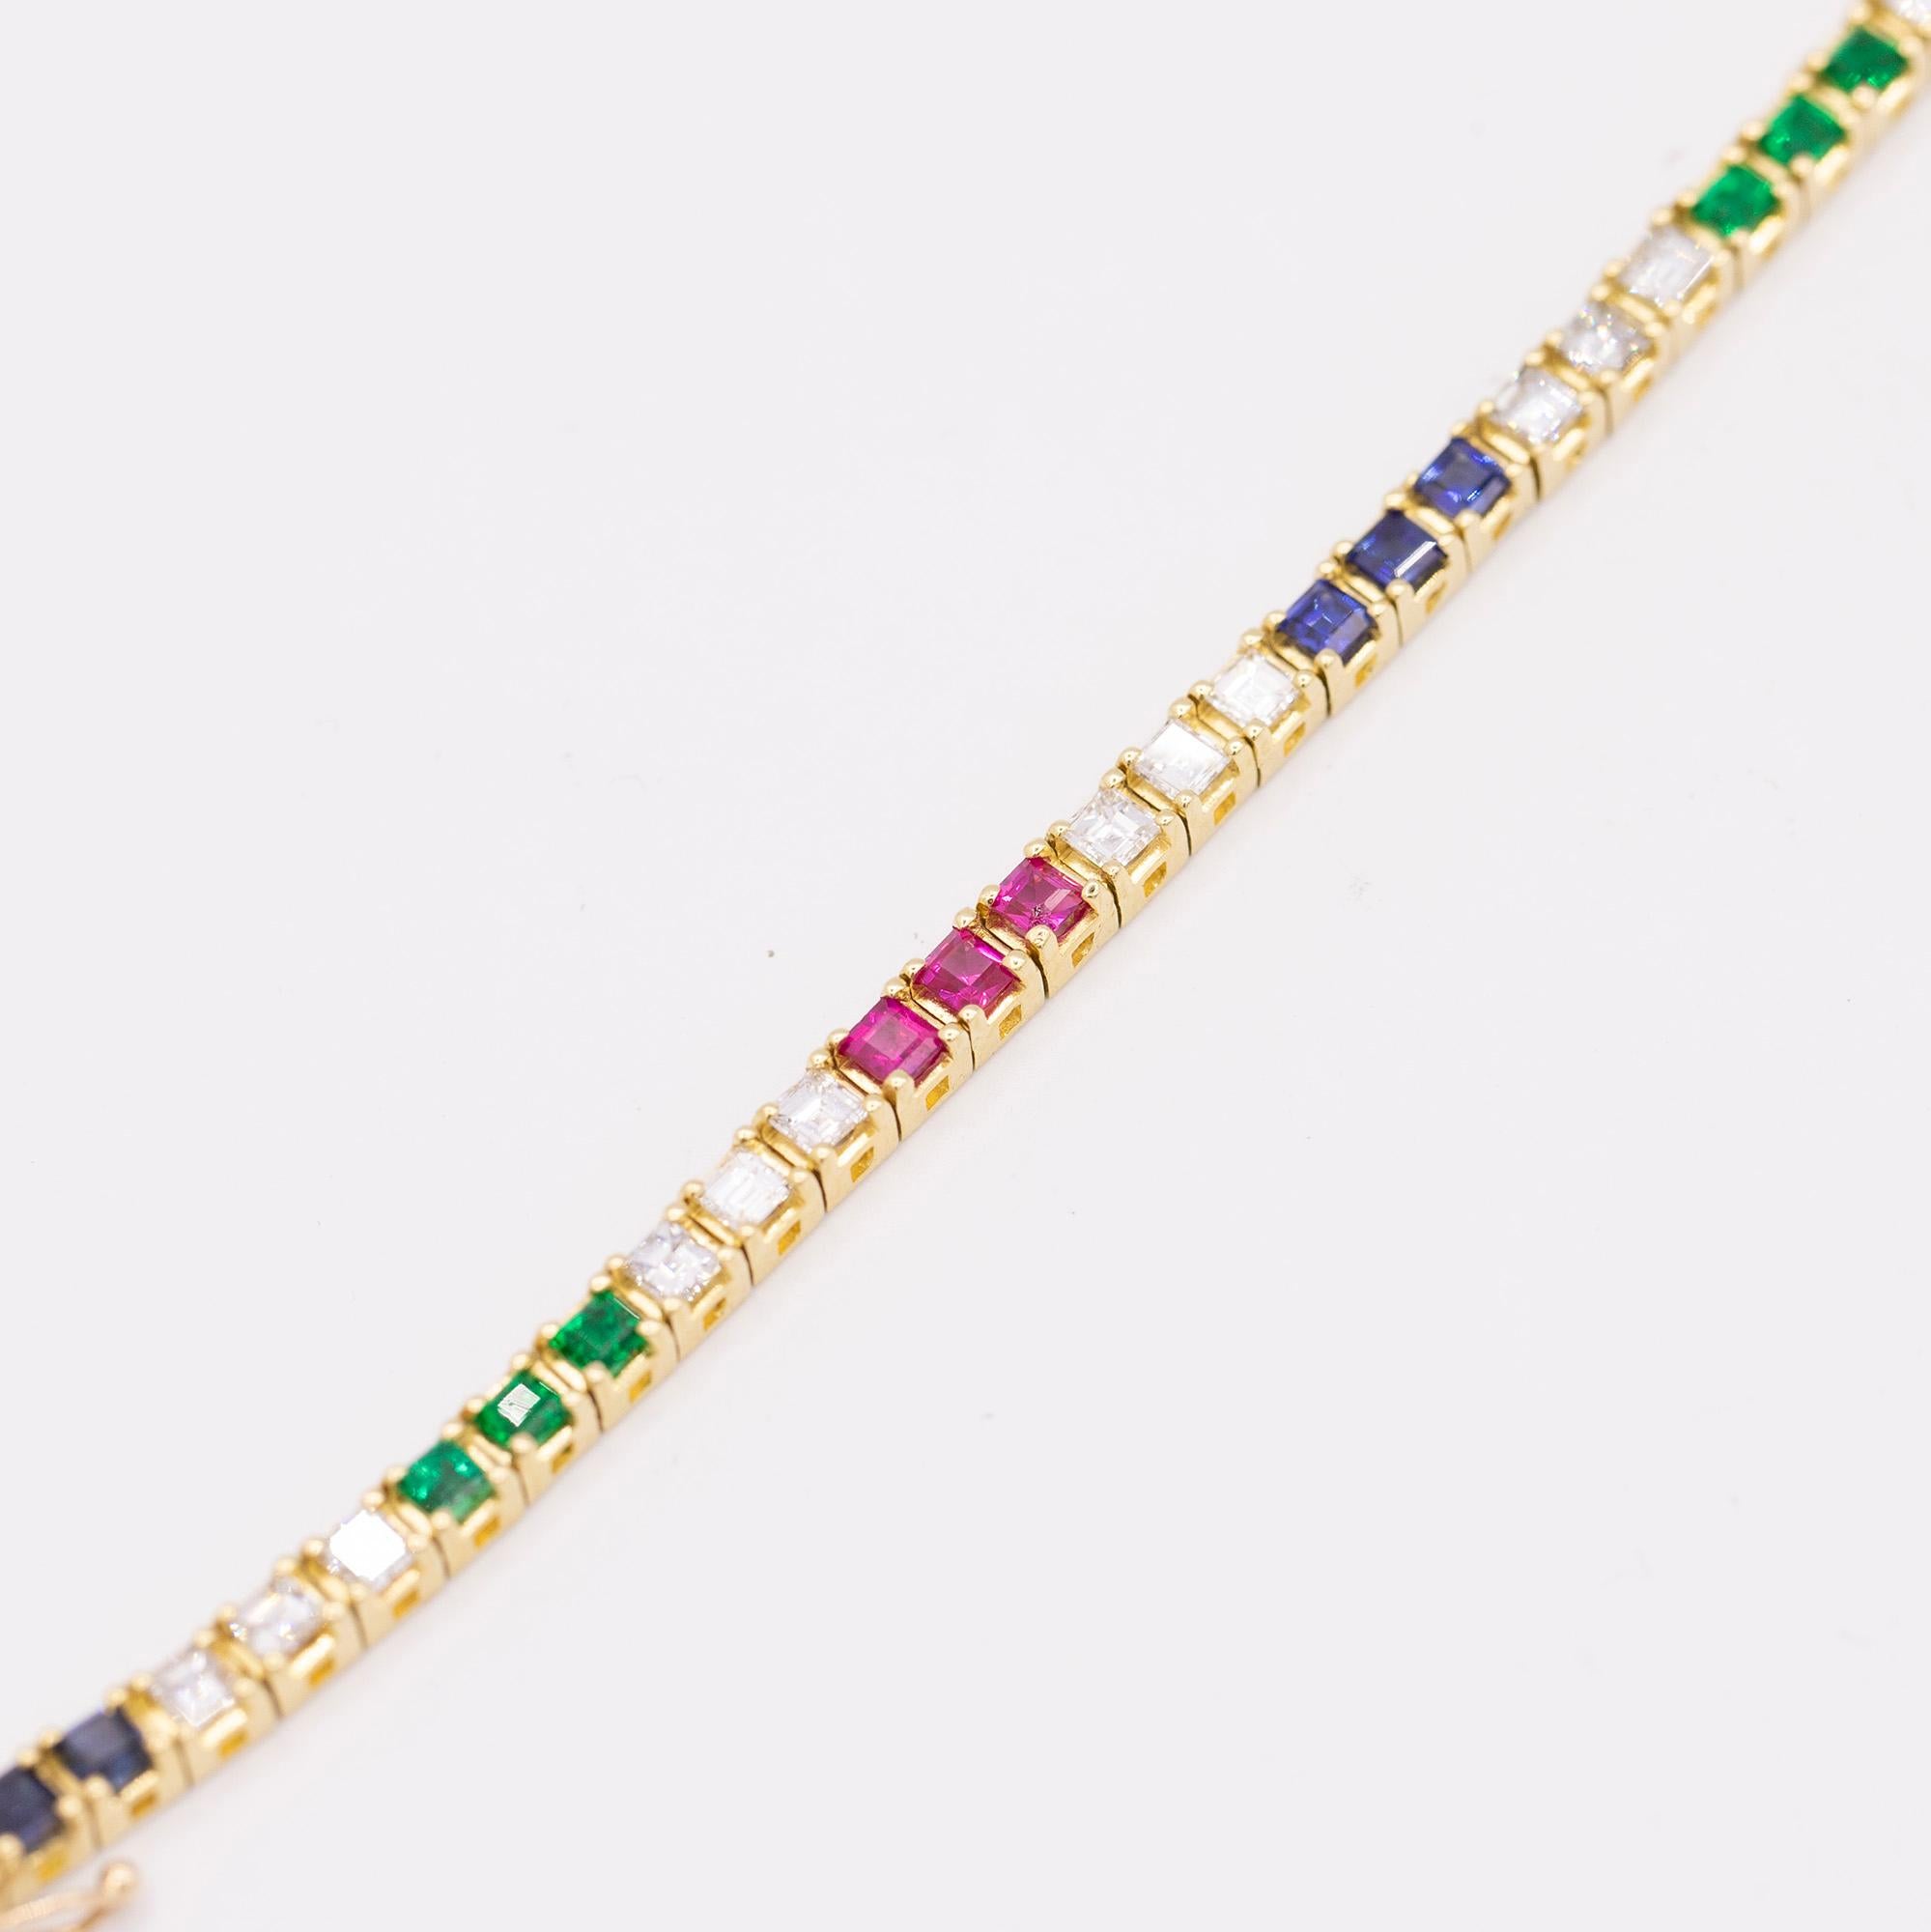 Vintage 18 Karat Yellow Gold Multi-Gem & Diamond line bracelet. The bracelet is featuring 24 square cut diamonds that have a total weight of 2.40 carats. The diamonds are G-H in color & VS2-SI1 in clarity. The 9 square cut emeralds are .72 carats in